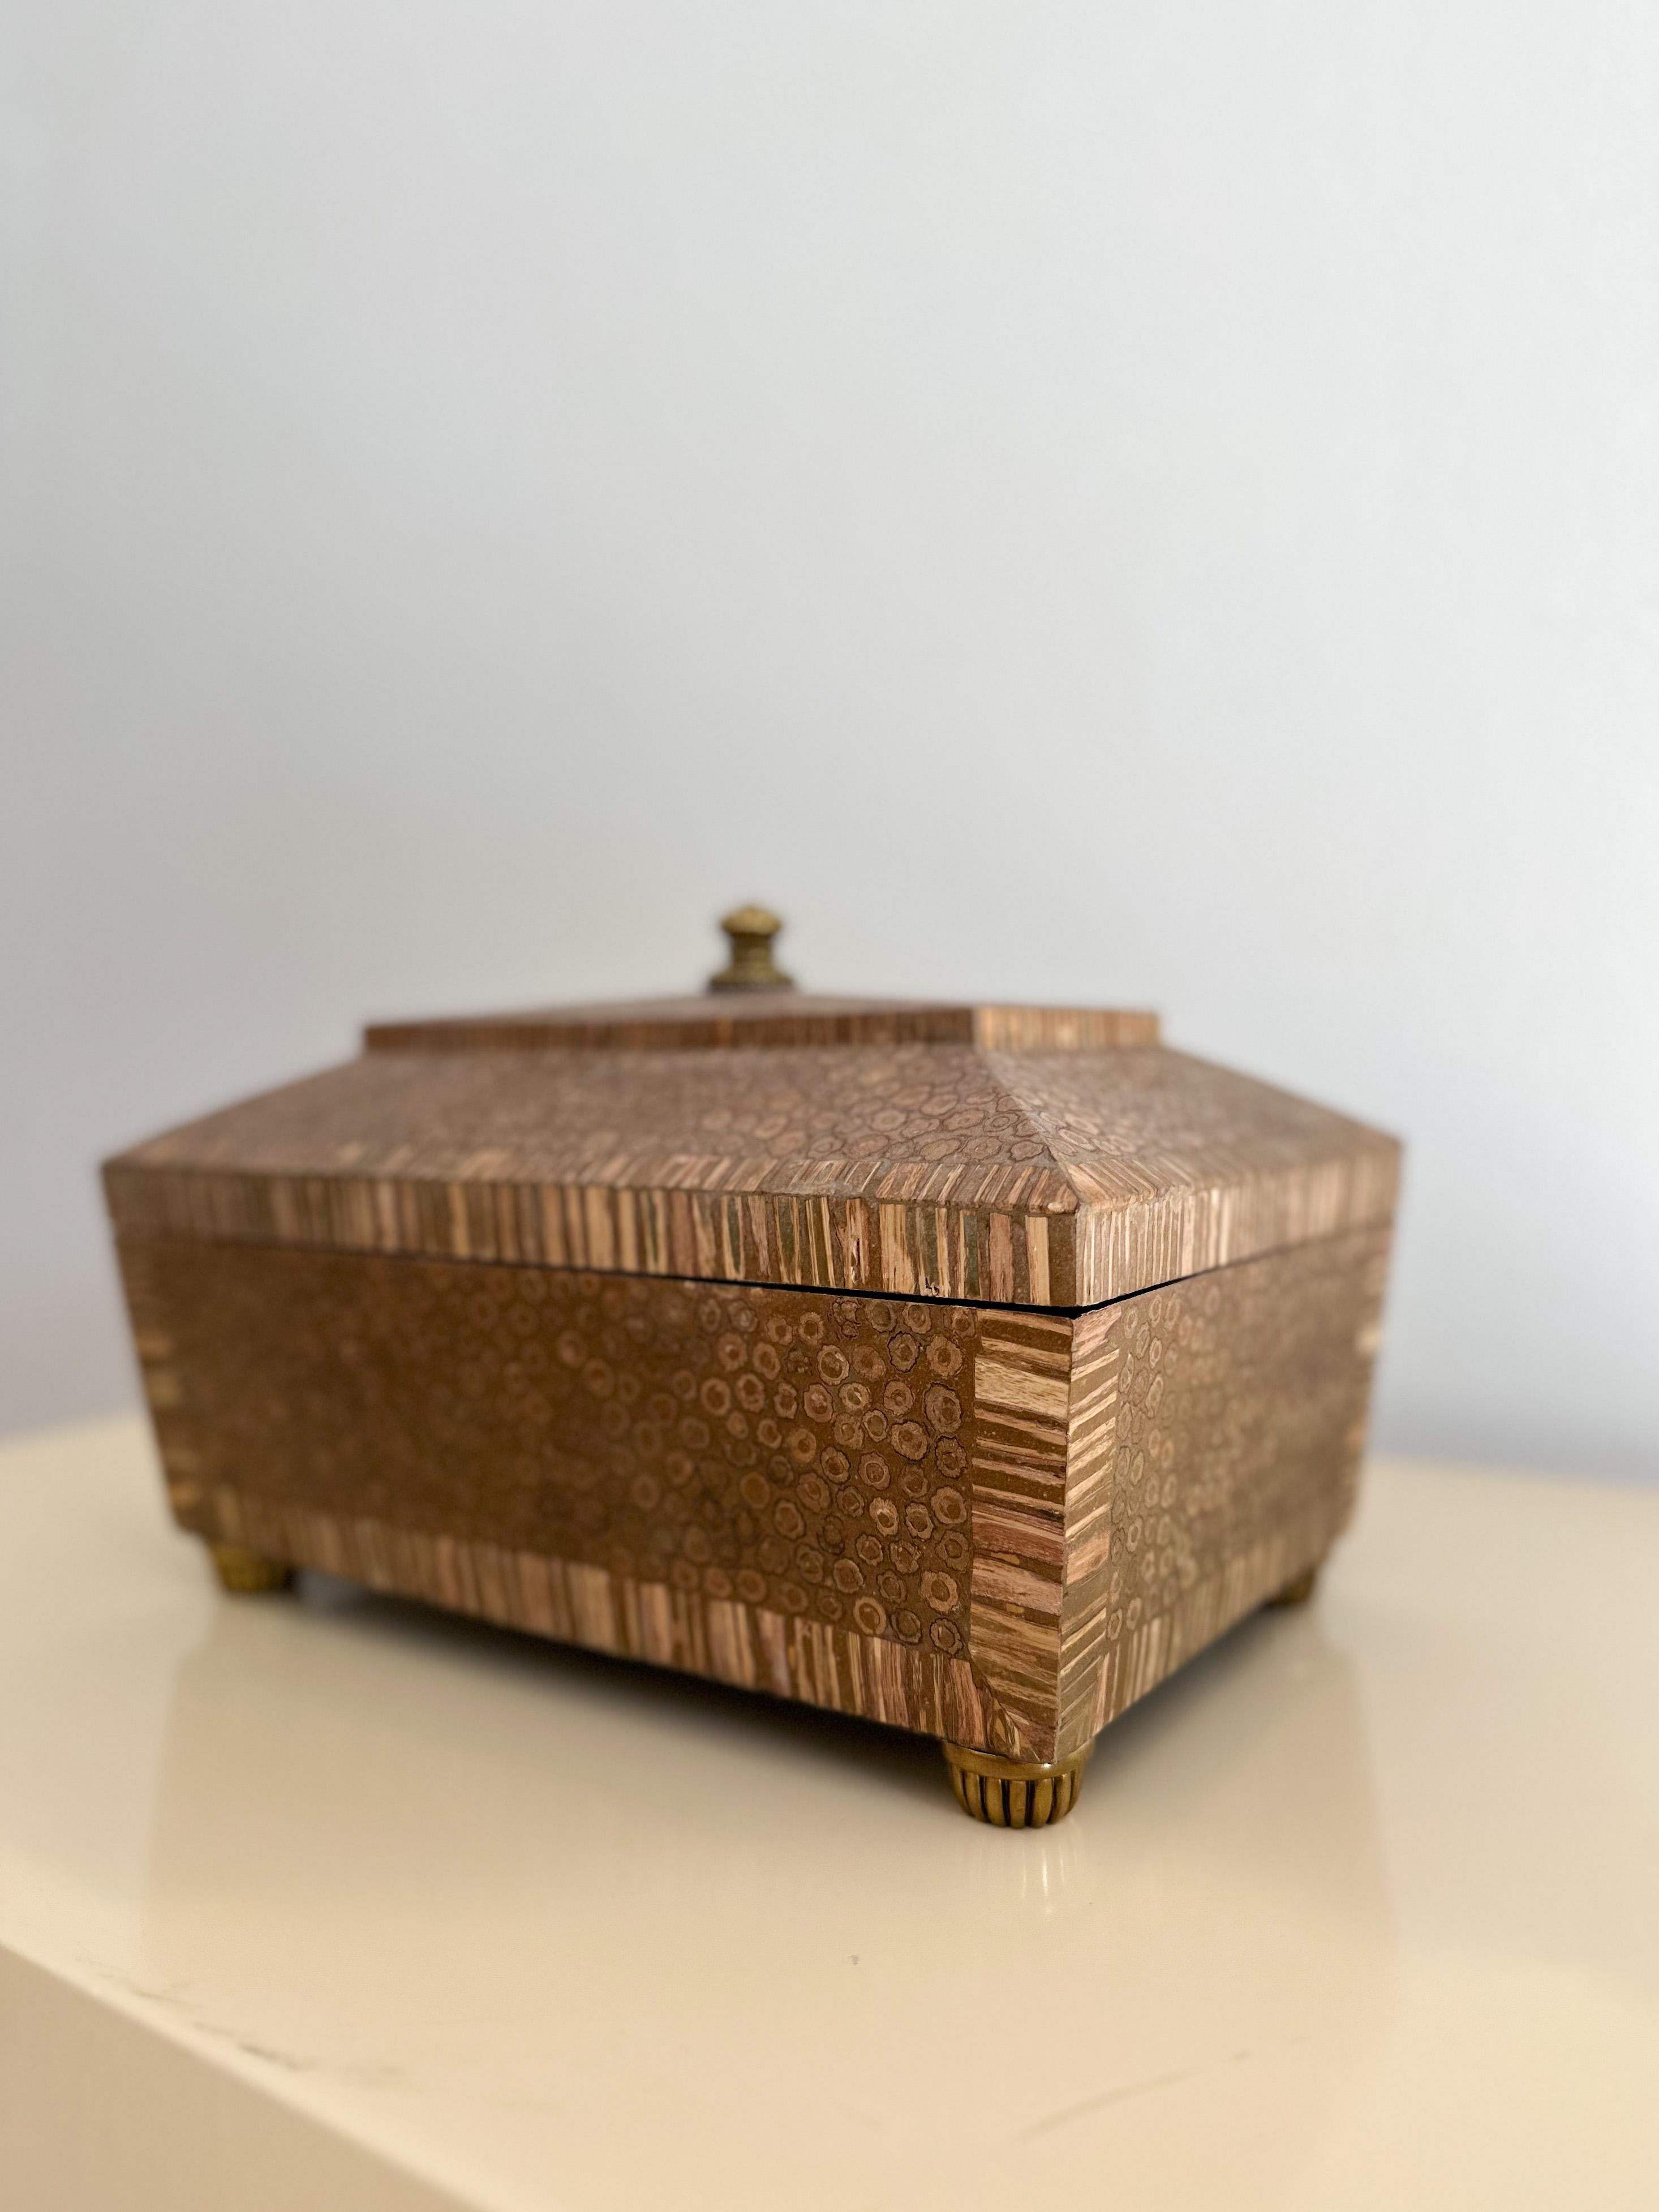 Beautiful Maitland Smith box with resin-encased stem-end finish, mahogany inlay, and brass accents, handcrafted in the Philippines, circa 1980s. Intriguing, organic construction out of what we believe are plant stems encased in resin, this piece has